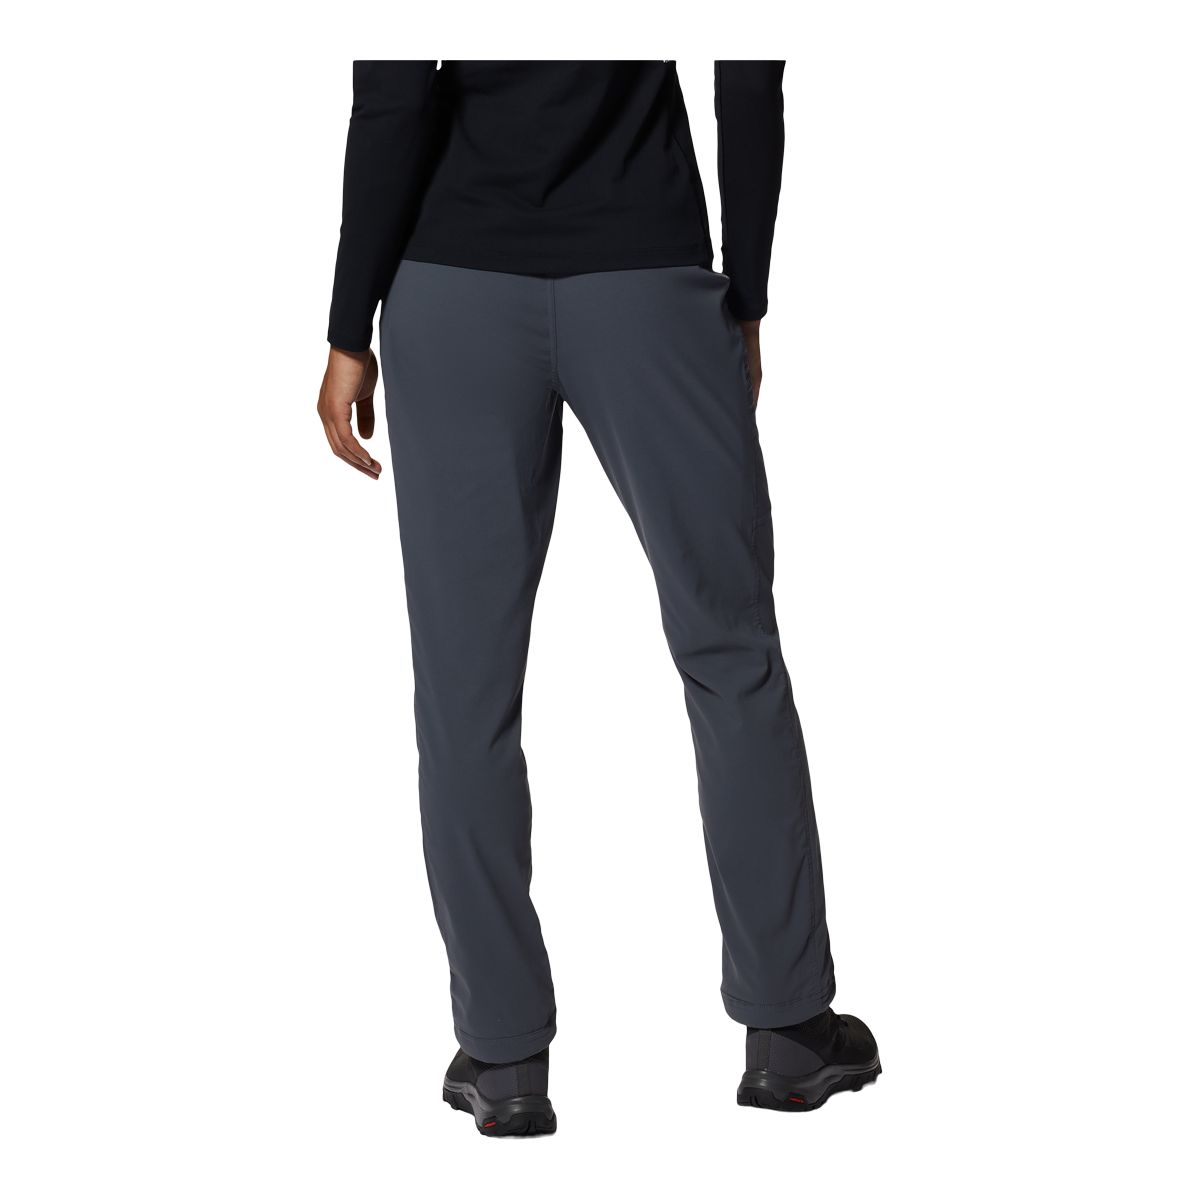 https://media-www.sportchek.ca/product/div-03-softgoods/dpt-72-casual-clothing/sdpt-02-womens/333850735/our-best-selling-women-s-stretch-pant-done-up-in-cold-weather-style-with-a-comfortable-high-rise-and-super-soft-brushed-mesh-lining-the-dynama-lined-high-rise-pant-gets-it-done-in-breathable-comfort-on-winter-bouldering-trips-and-late-season-hikes--03b6af06-4153-4b6f-98d9-947aa3bacedf-jpgrendition.jpg?imdensity=1&imwidth=1244&impolicy=mZoom